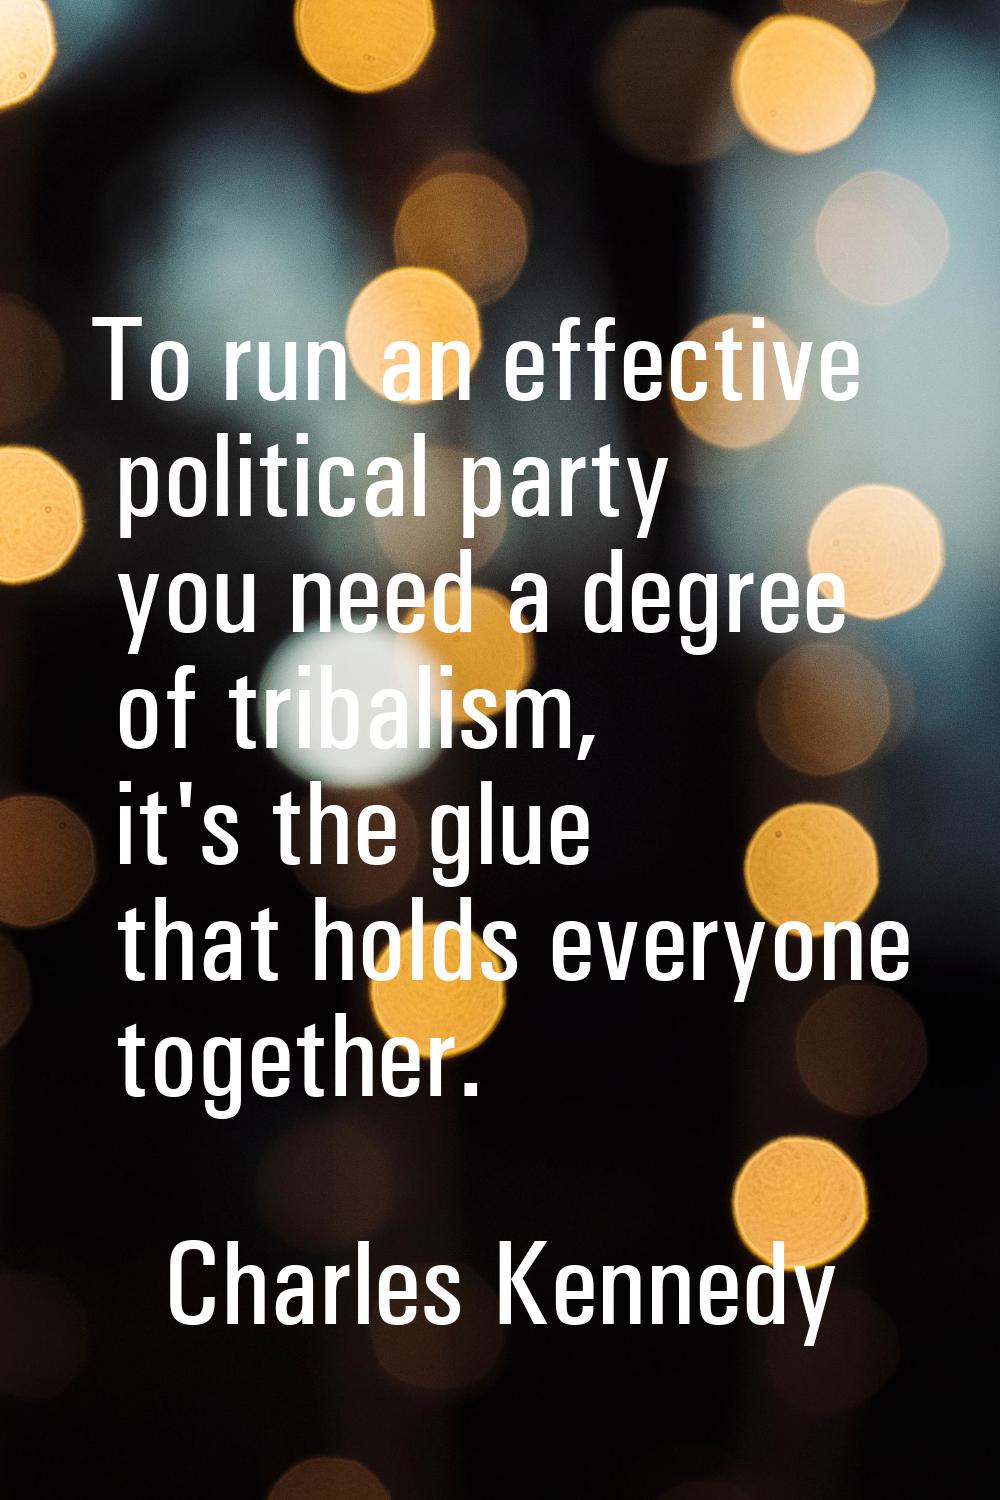 To run an effective political party you need a degree of tribalism, it's the glue that holds everyo